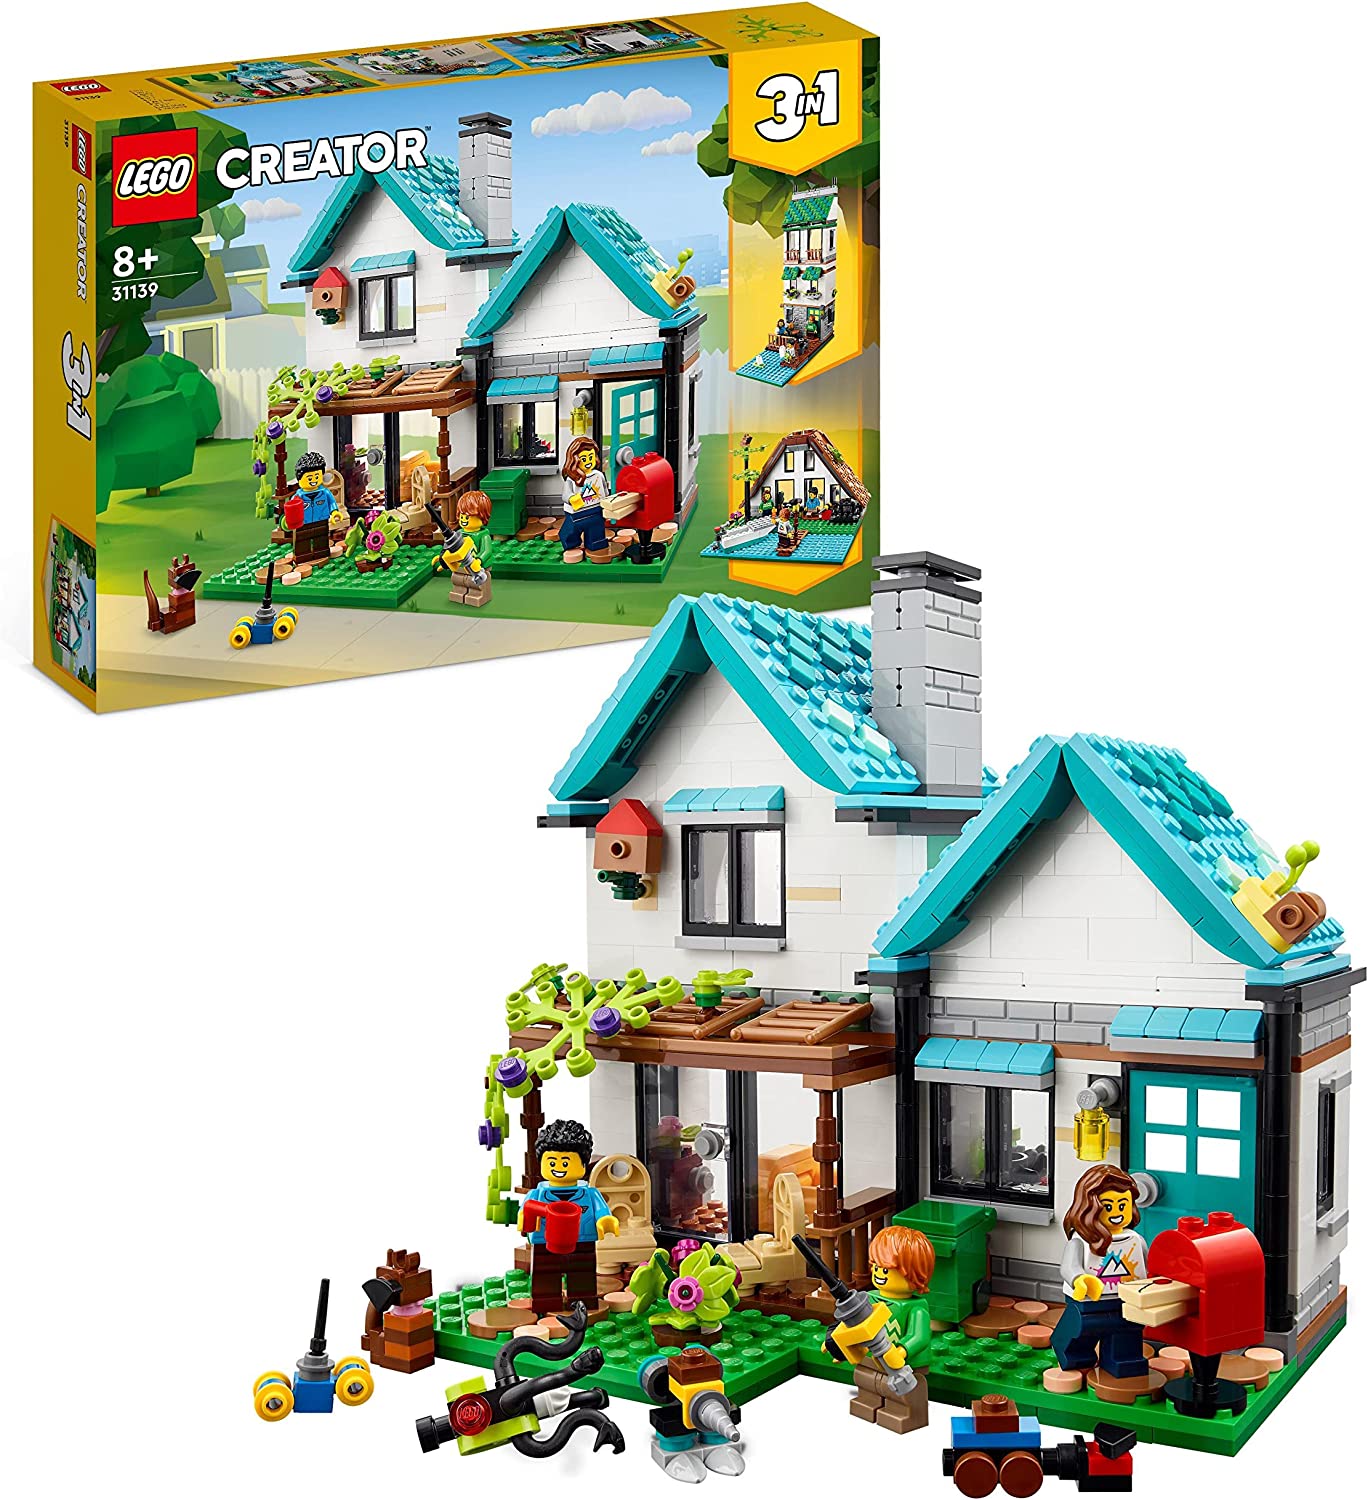 LEGO 31139 Creator 3-in-1 Cosy House Set, Model Kit with 3 Different Houses, Plus Family Mini Figures and Accessories, Gift for Children, Boys and Girls